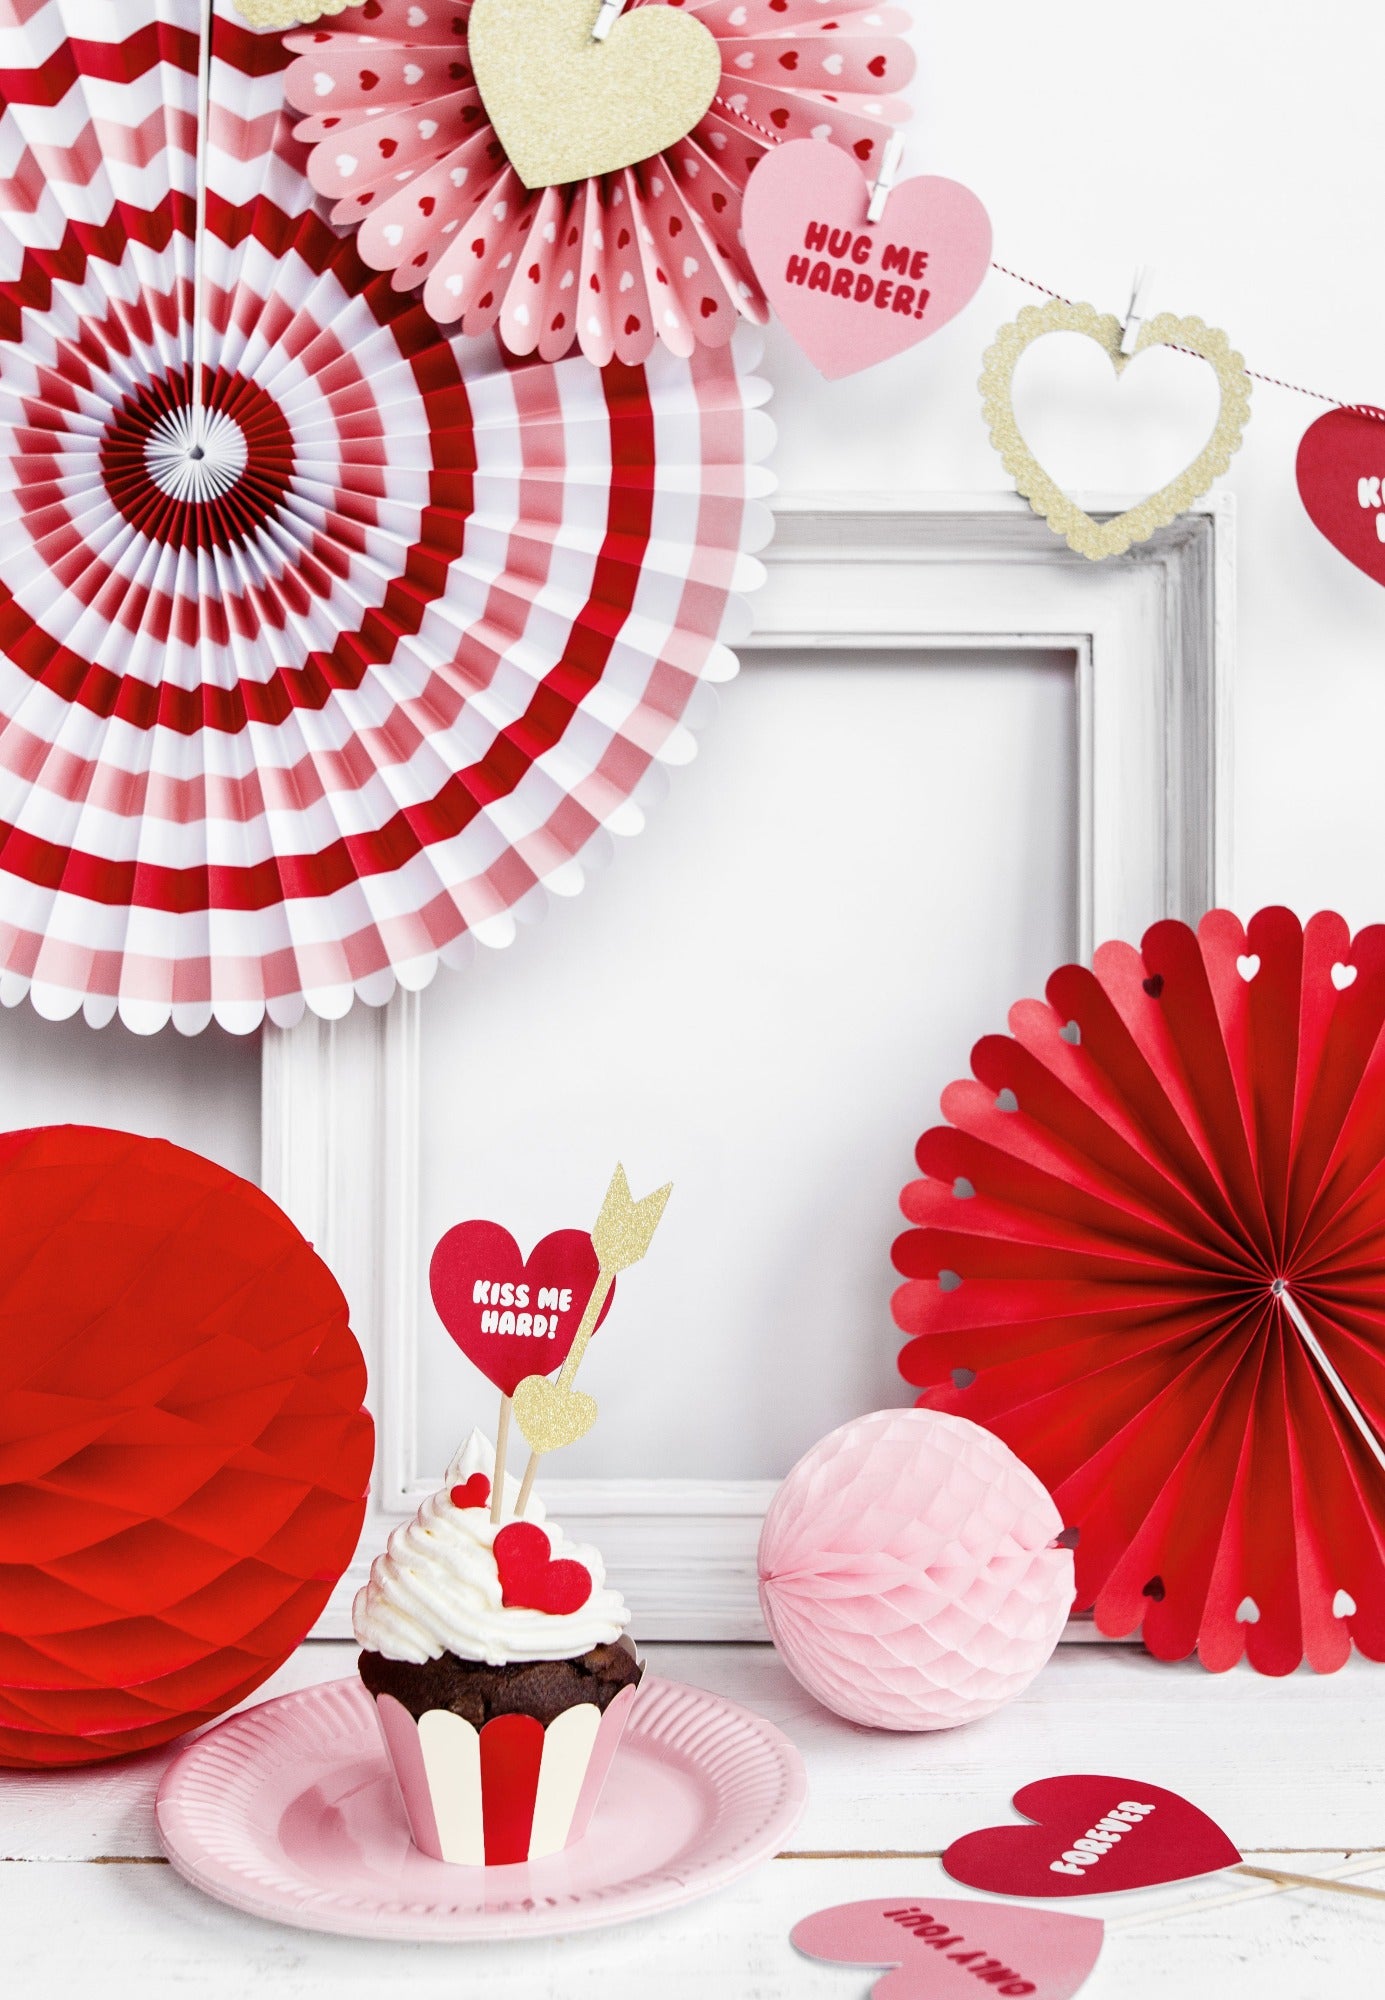 Decorative Rosettes Sweet Love Party Decorations